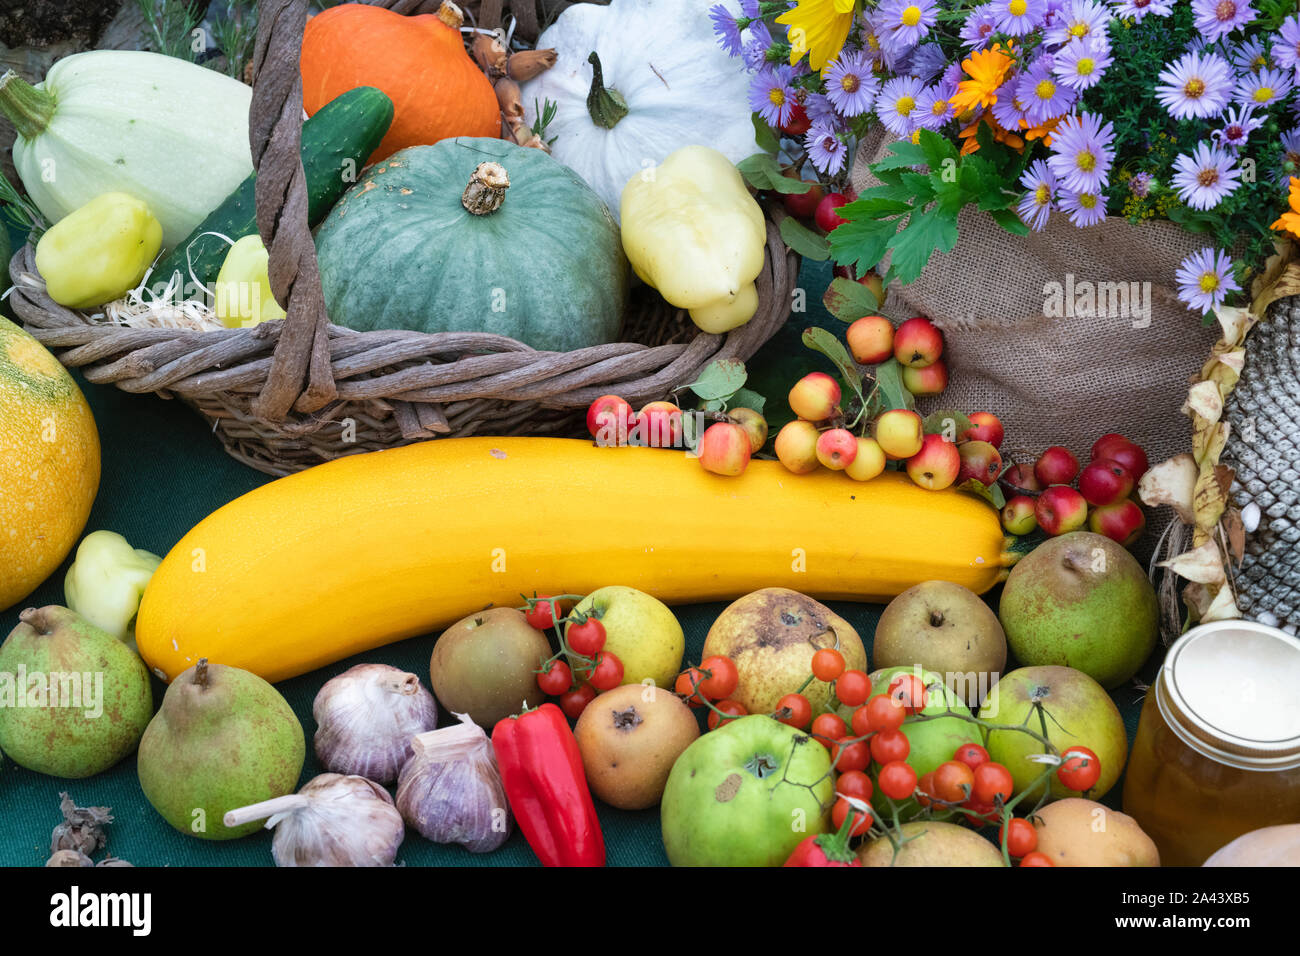 Vegetable, fruit and flower display.  UK Stock Photo